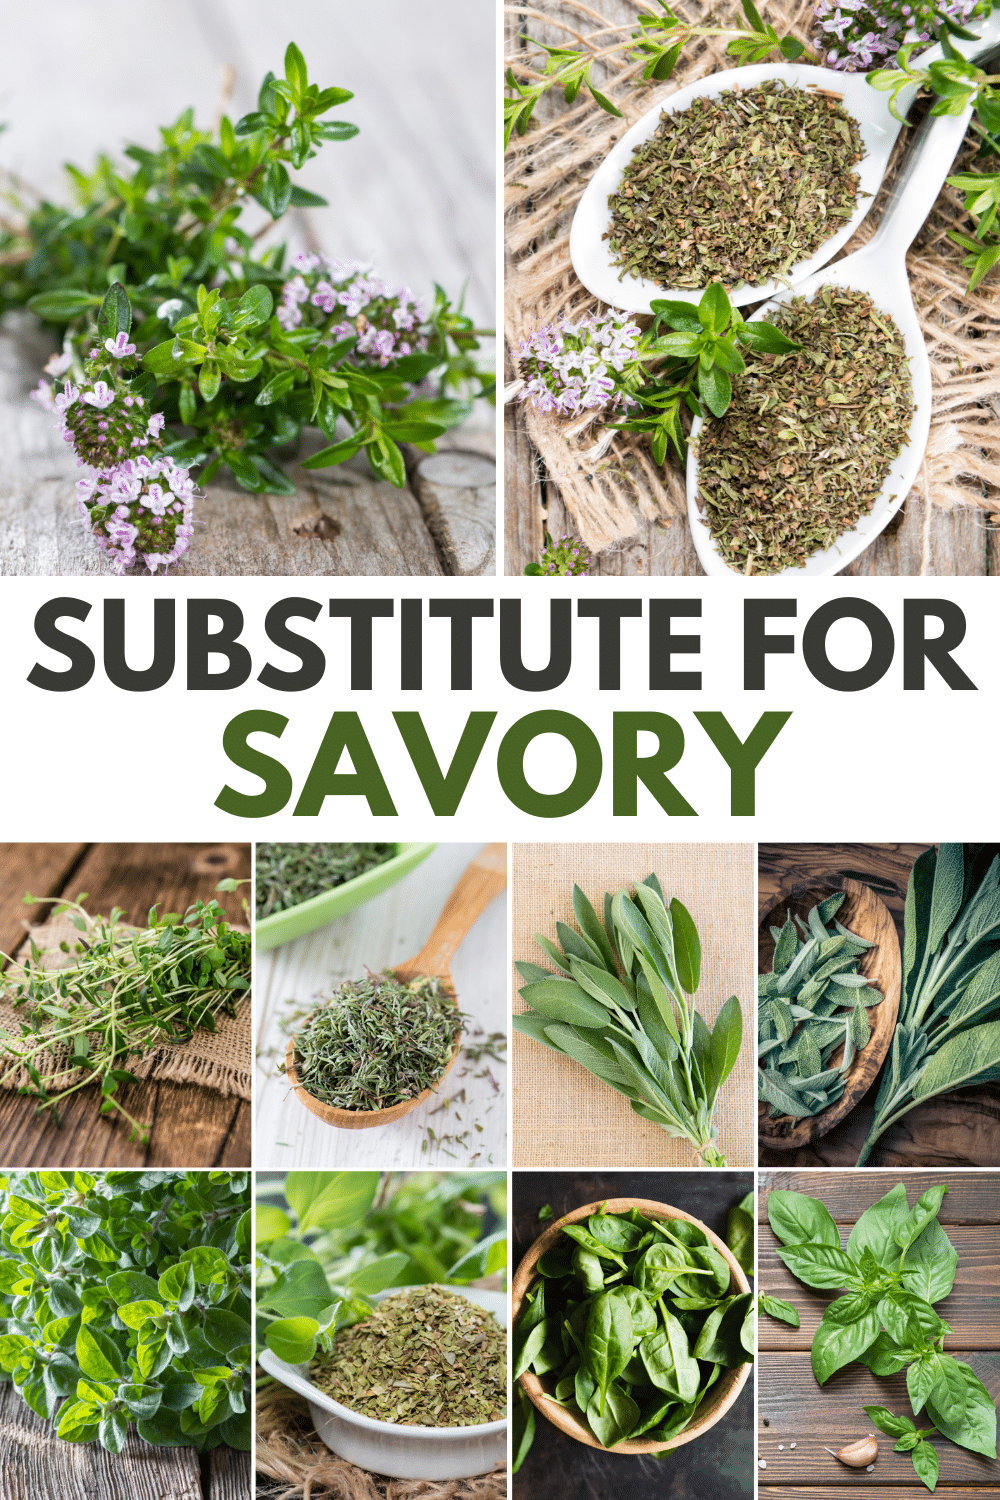 A diverse montage of fresh and enticing herbs, serving as the perfect substitute for savory flavors.